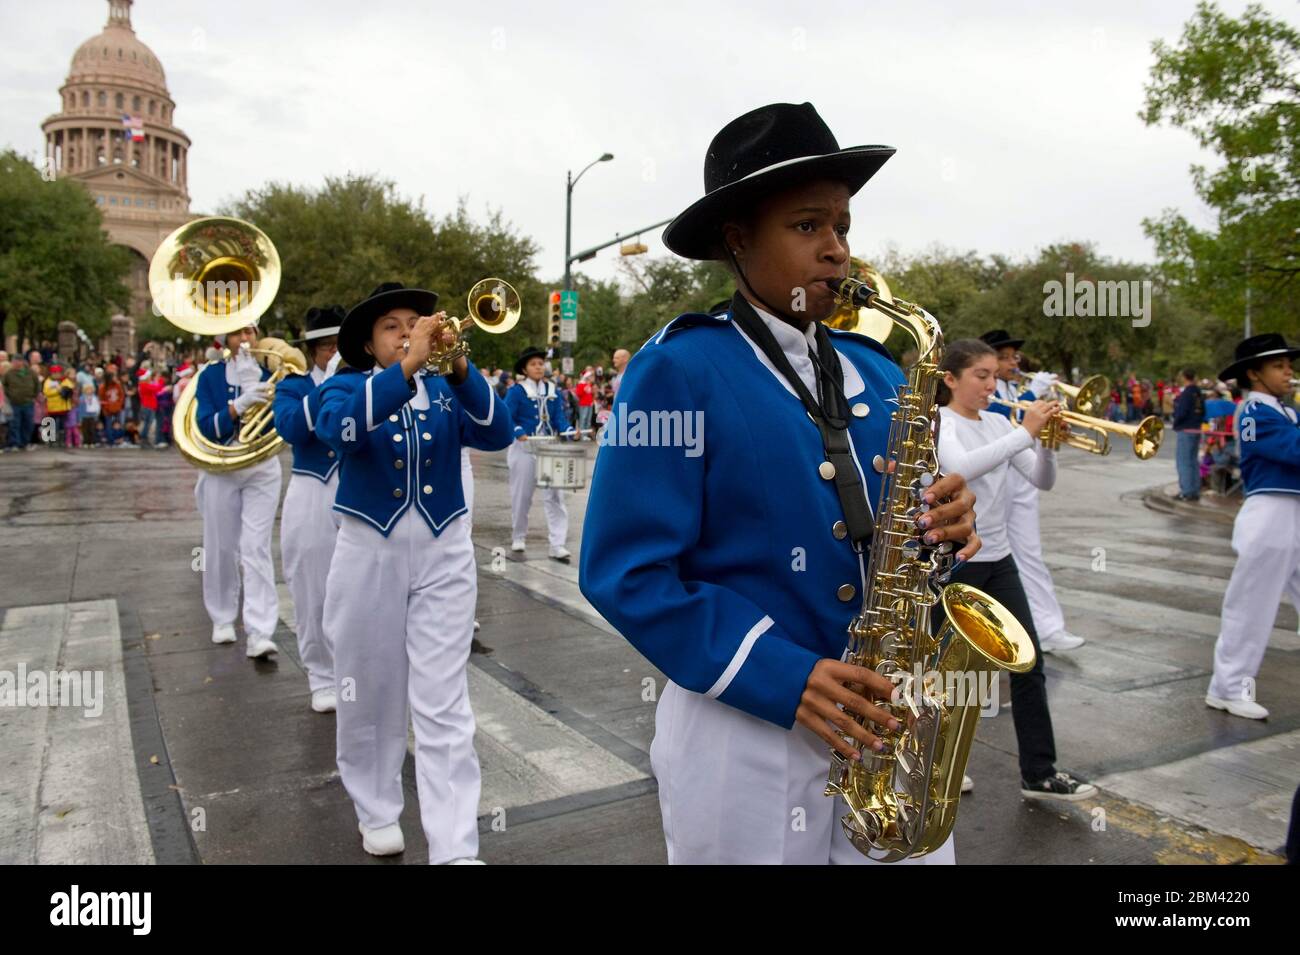 Austin, Texas USA, November 26. 2011: Members of a high school marching band participate in the annual Children Giving to Children parade in downtown, at which children bring toys for holiday distribution to needy families. ©Bob Daemmrich Stock Photo